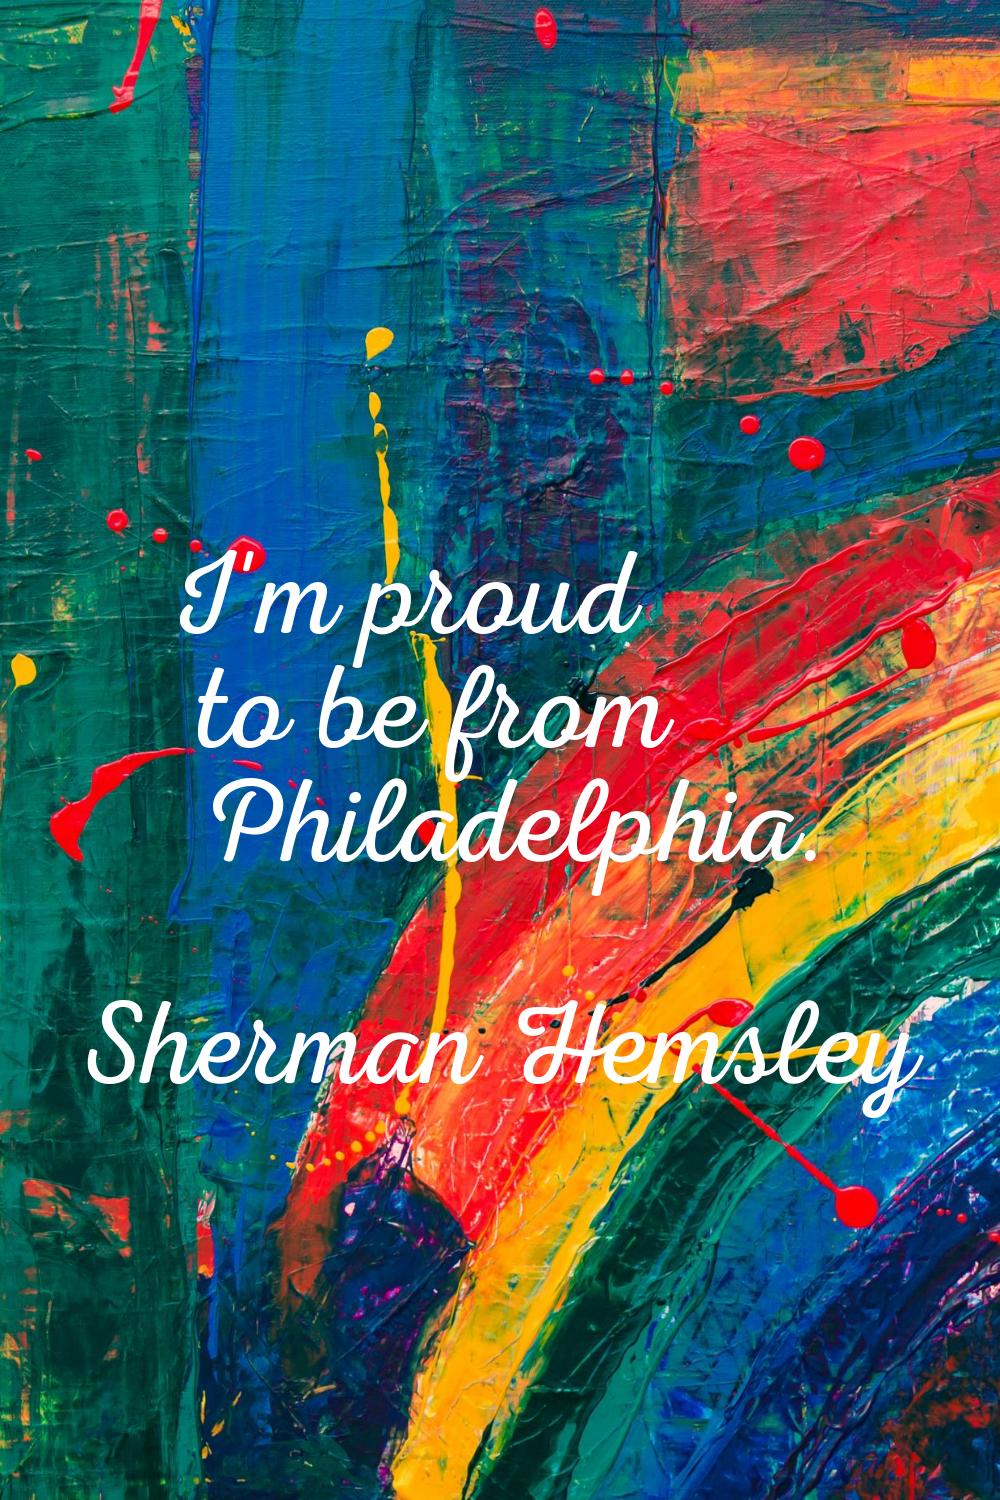 I'm proud to be from Philadelphia.